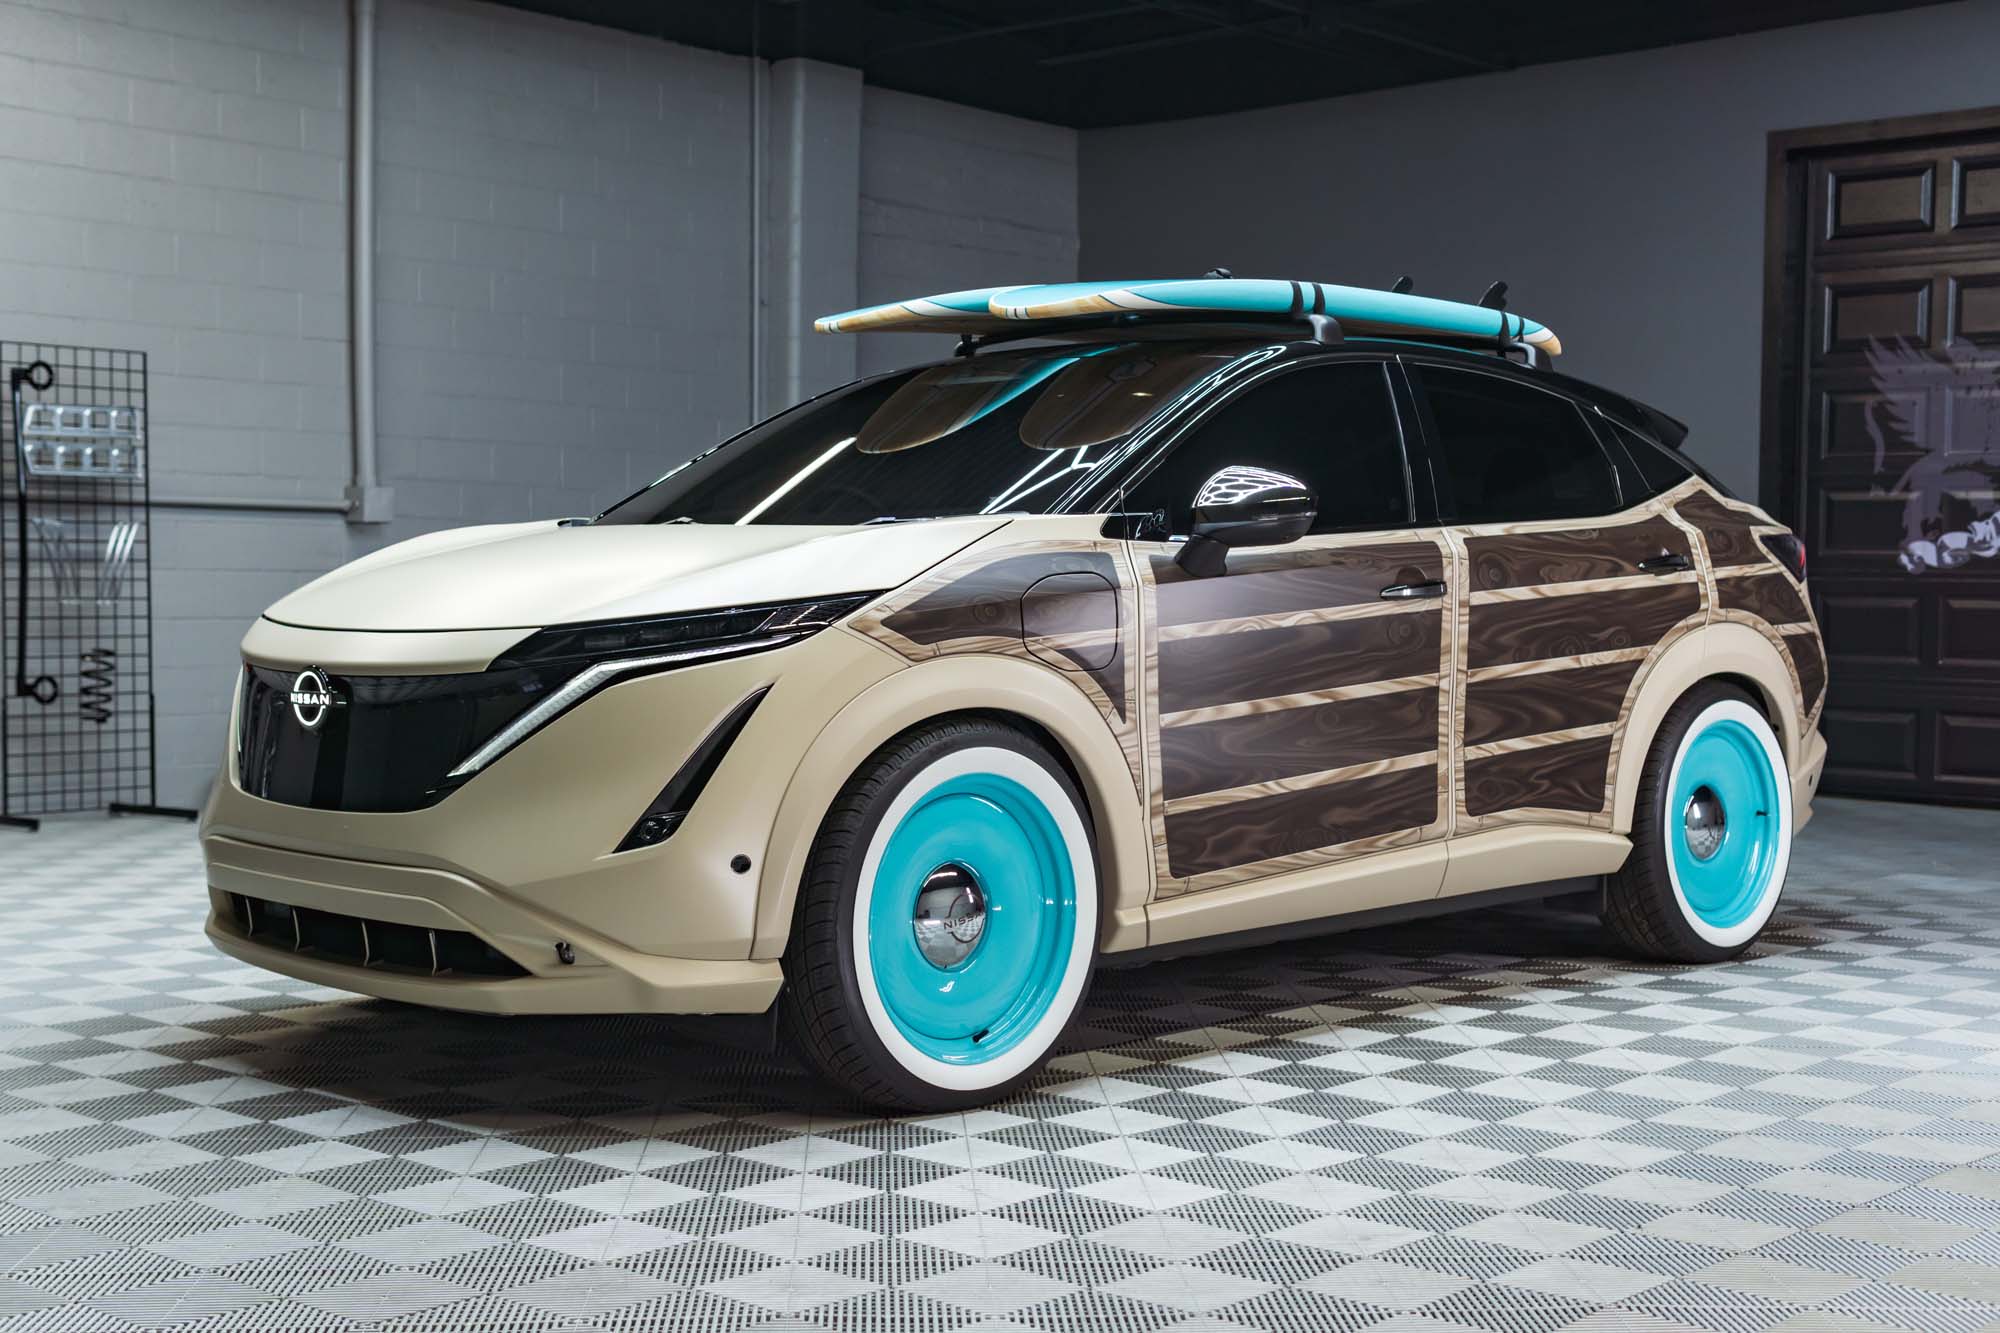 Designed to inspire EV owners to personalize their vehicles to fit their lifestyles, the Nissan Ariya Surfwagon concept reimagines the 2023 Ariya as a California-style surf “woodie” wagon."